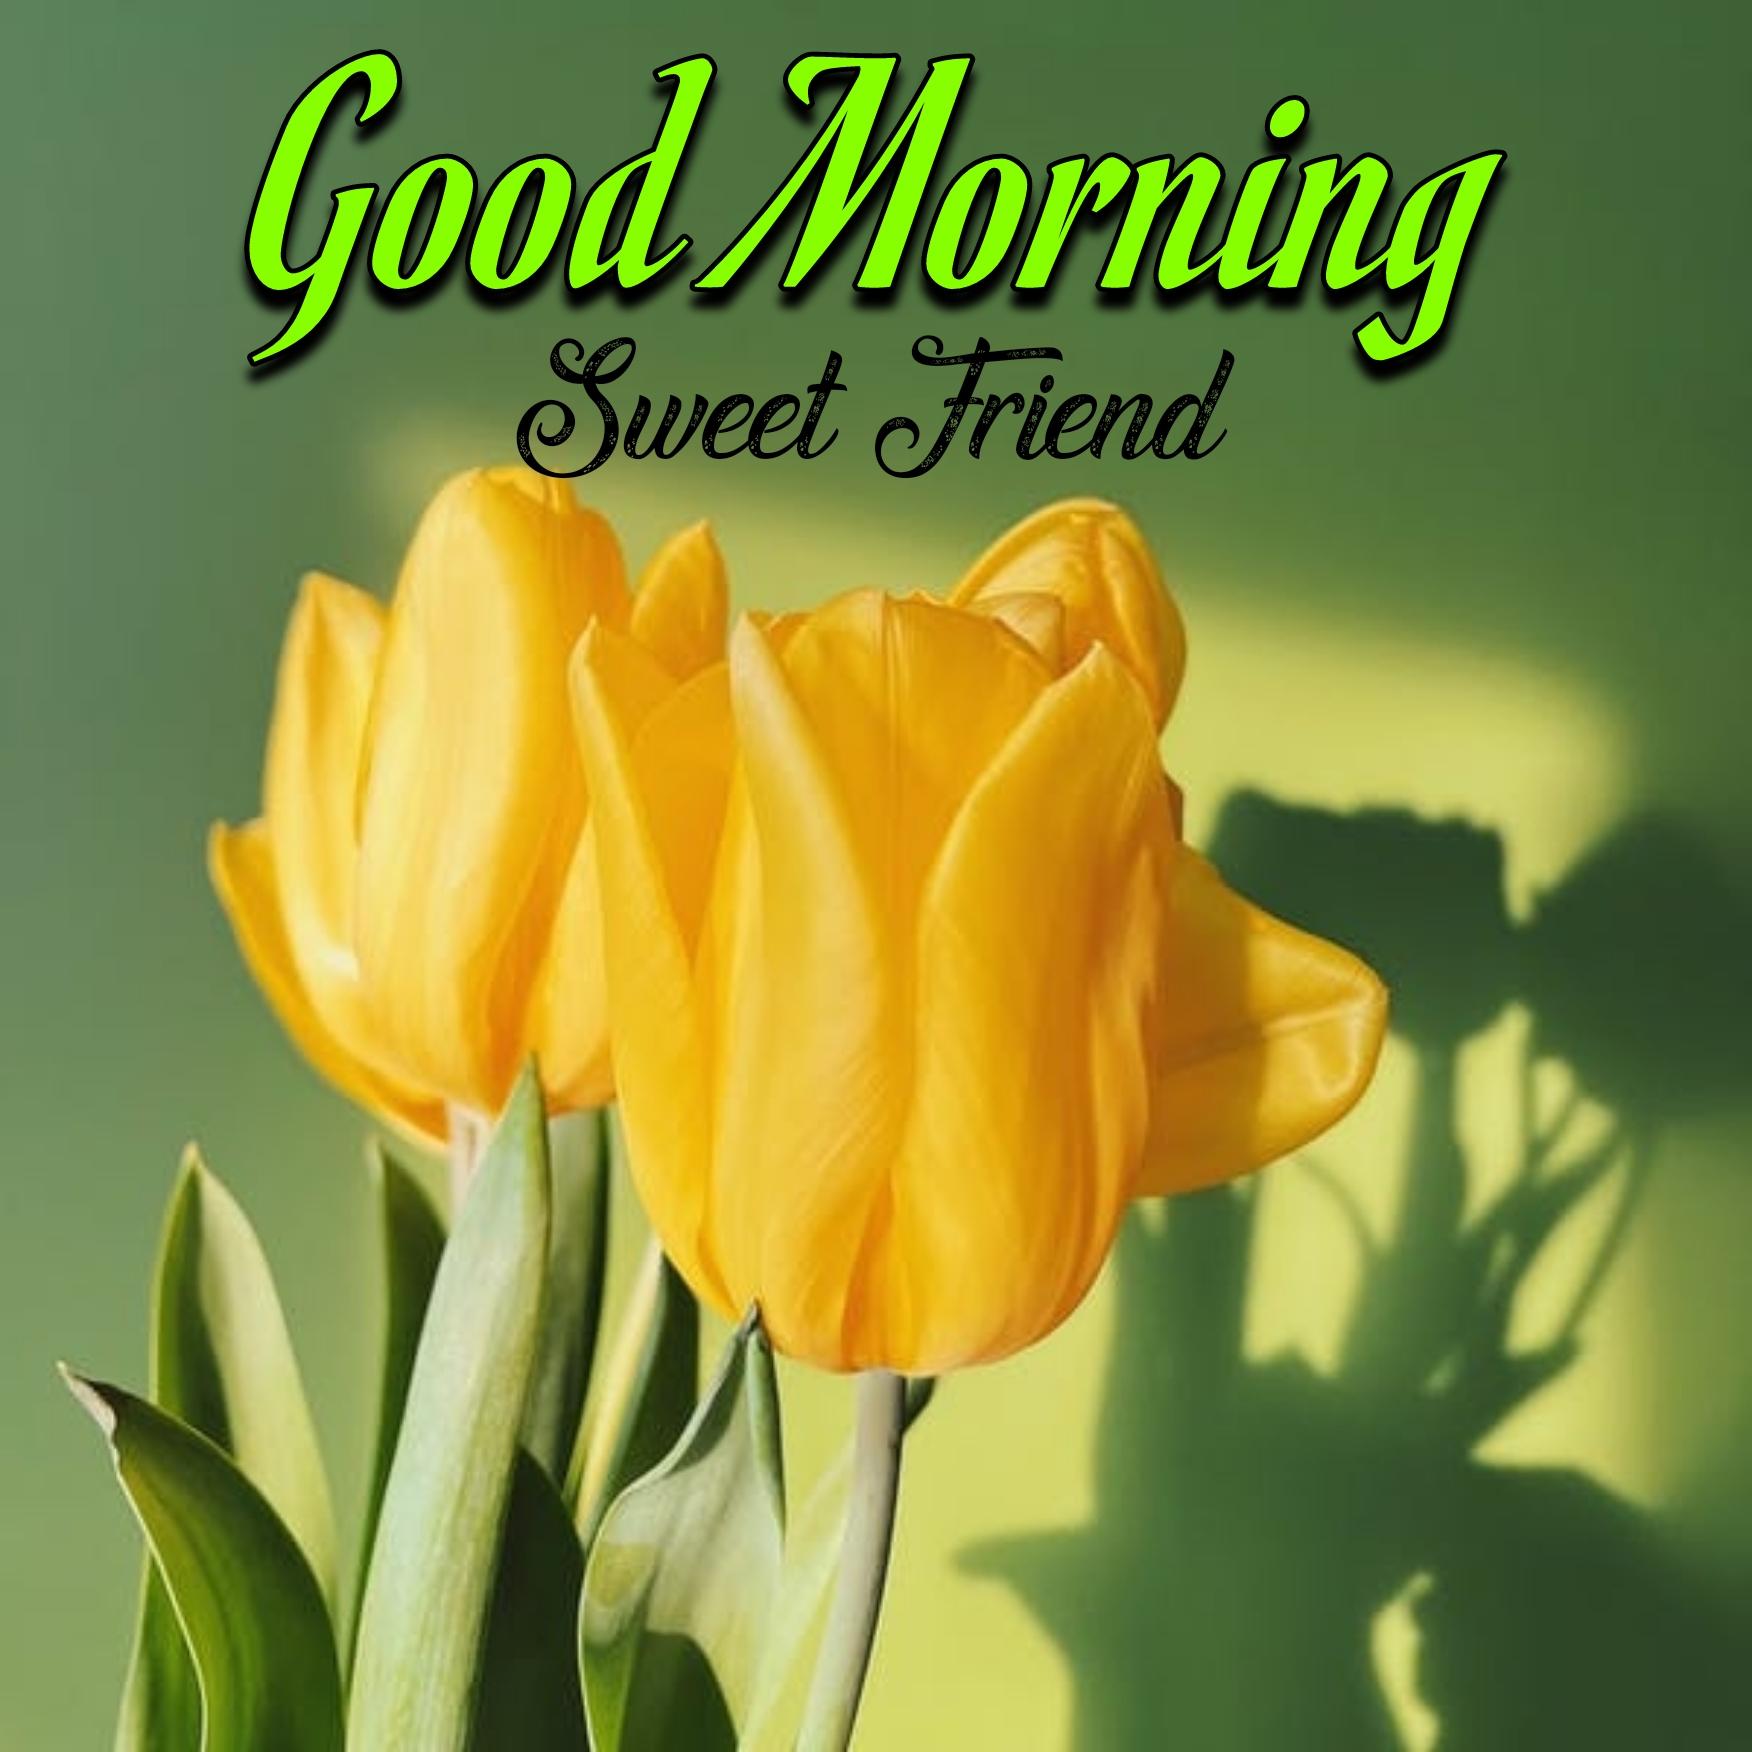 Good Morning Sweet Friend Images